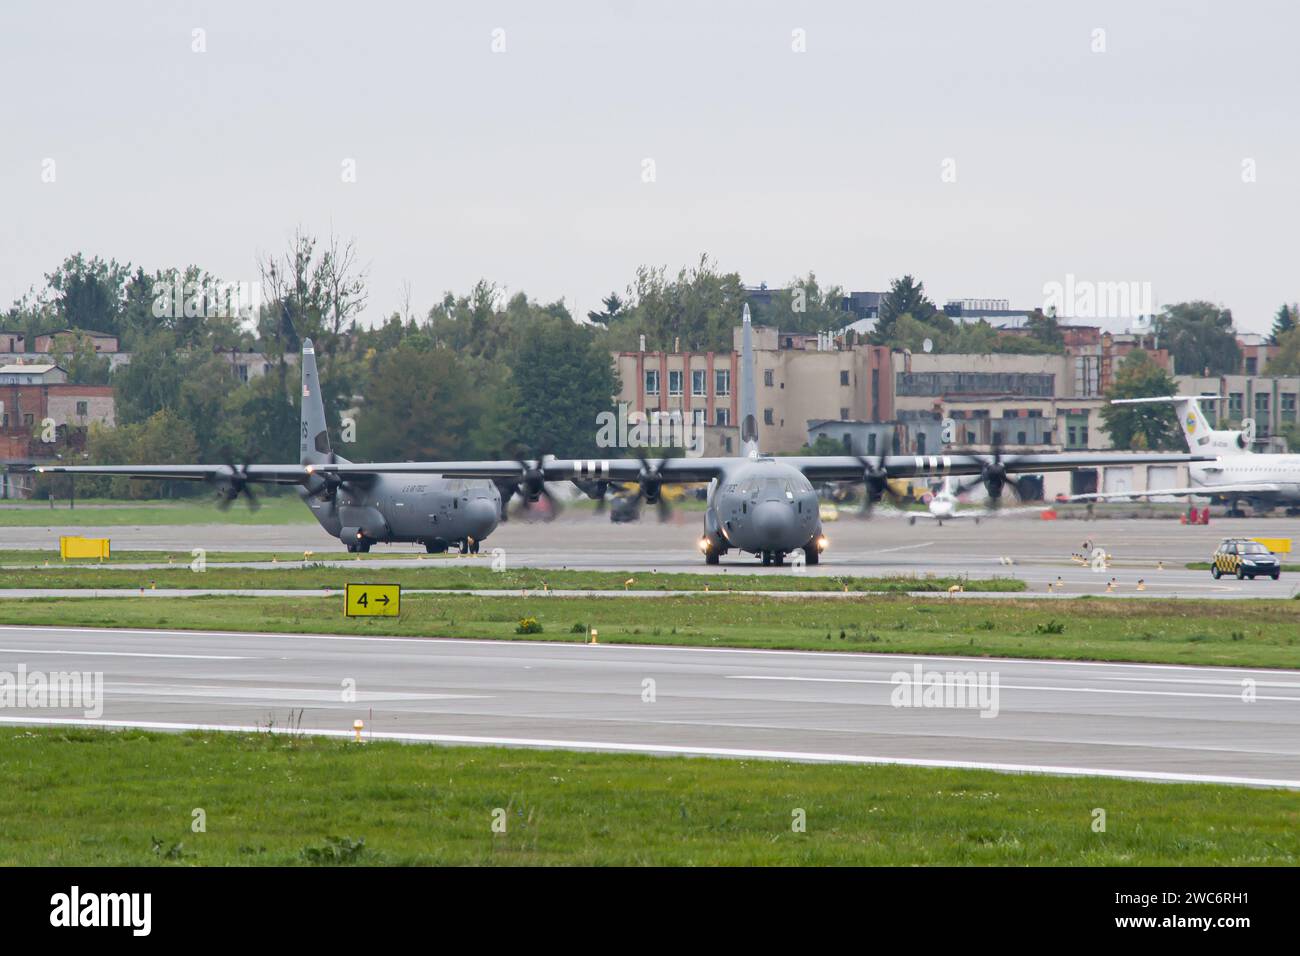 A pair of US Air Force Lockheed C-130 Hercules military transport airplanes taxiing for takeoff from Lviv Stock Photo